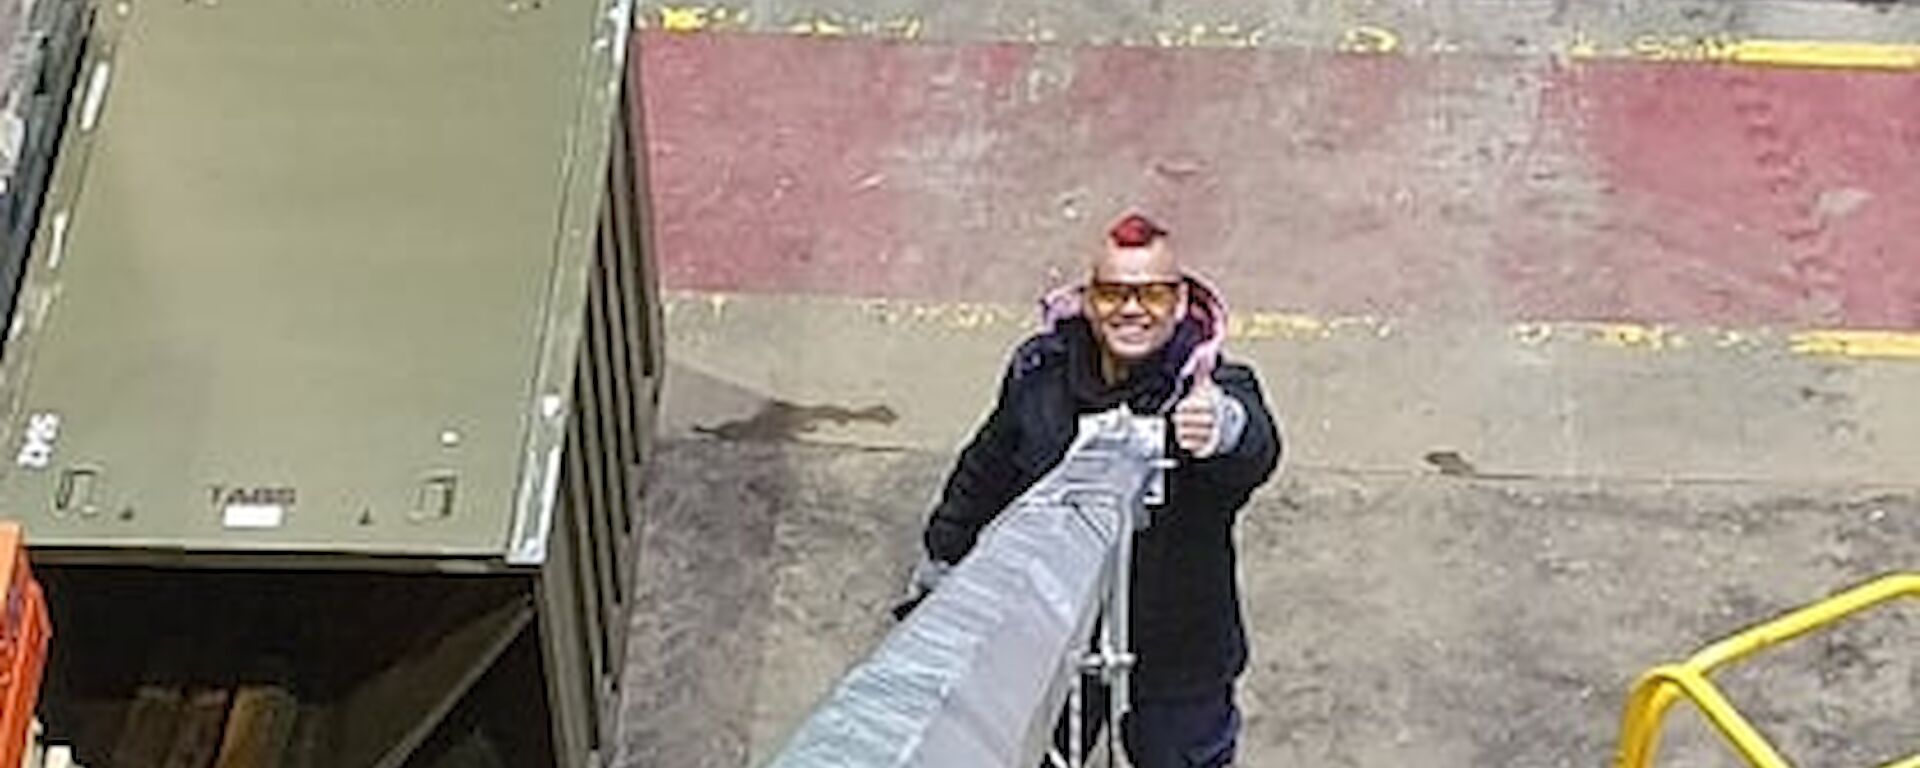 A image taken down the shaft of a large metal pipe.  A man stands at the bottom holding the pipe with one thumbs up.